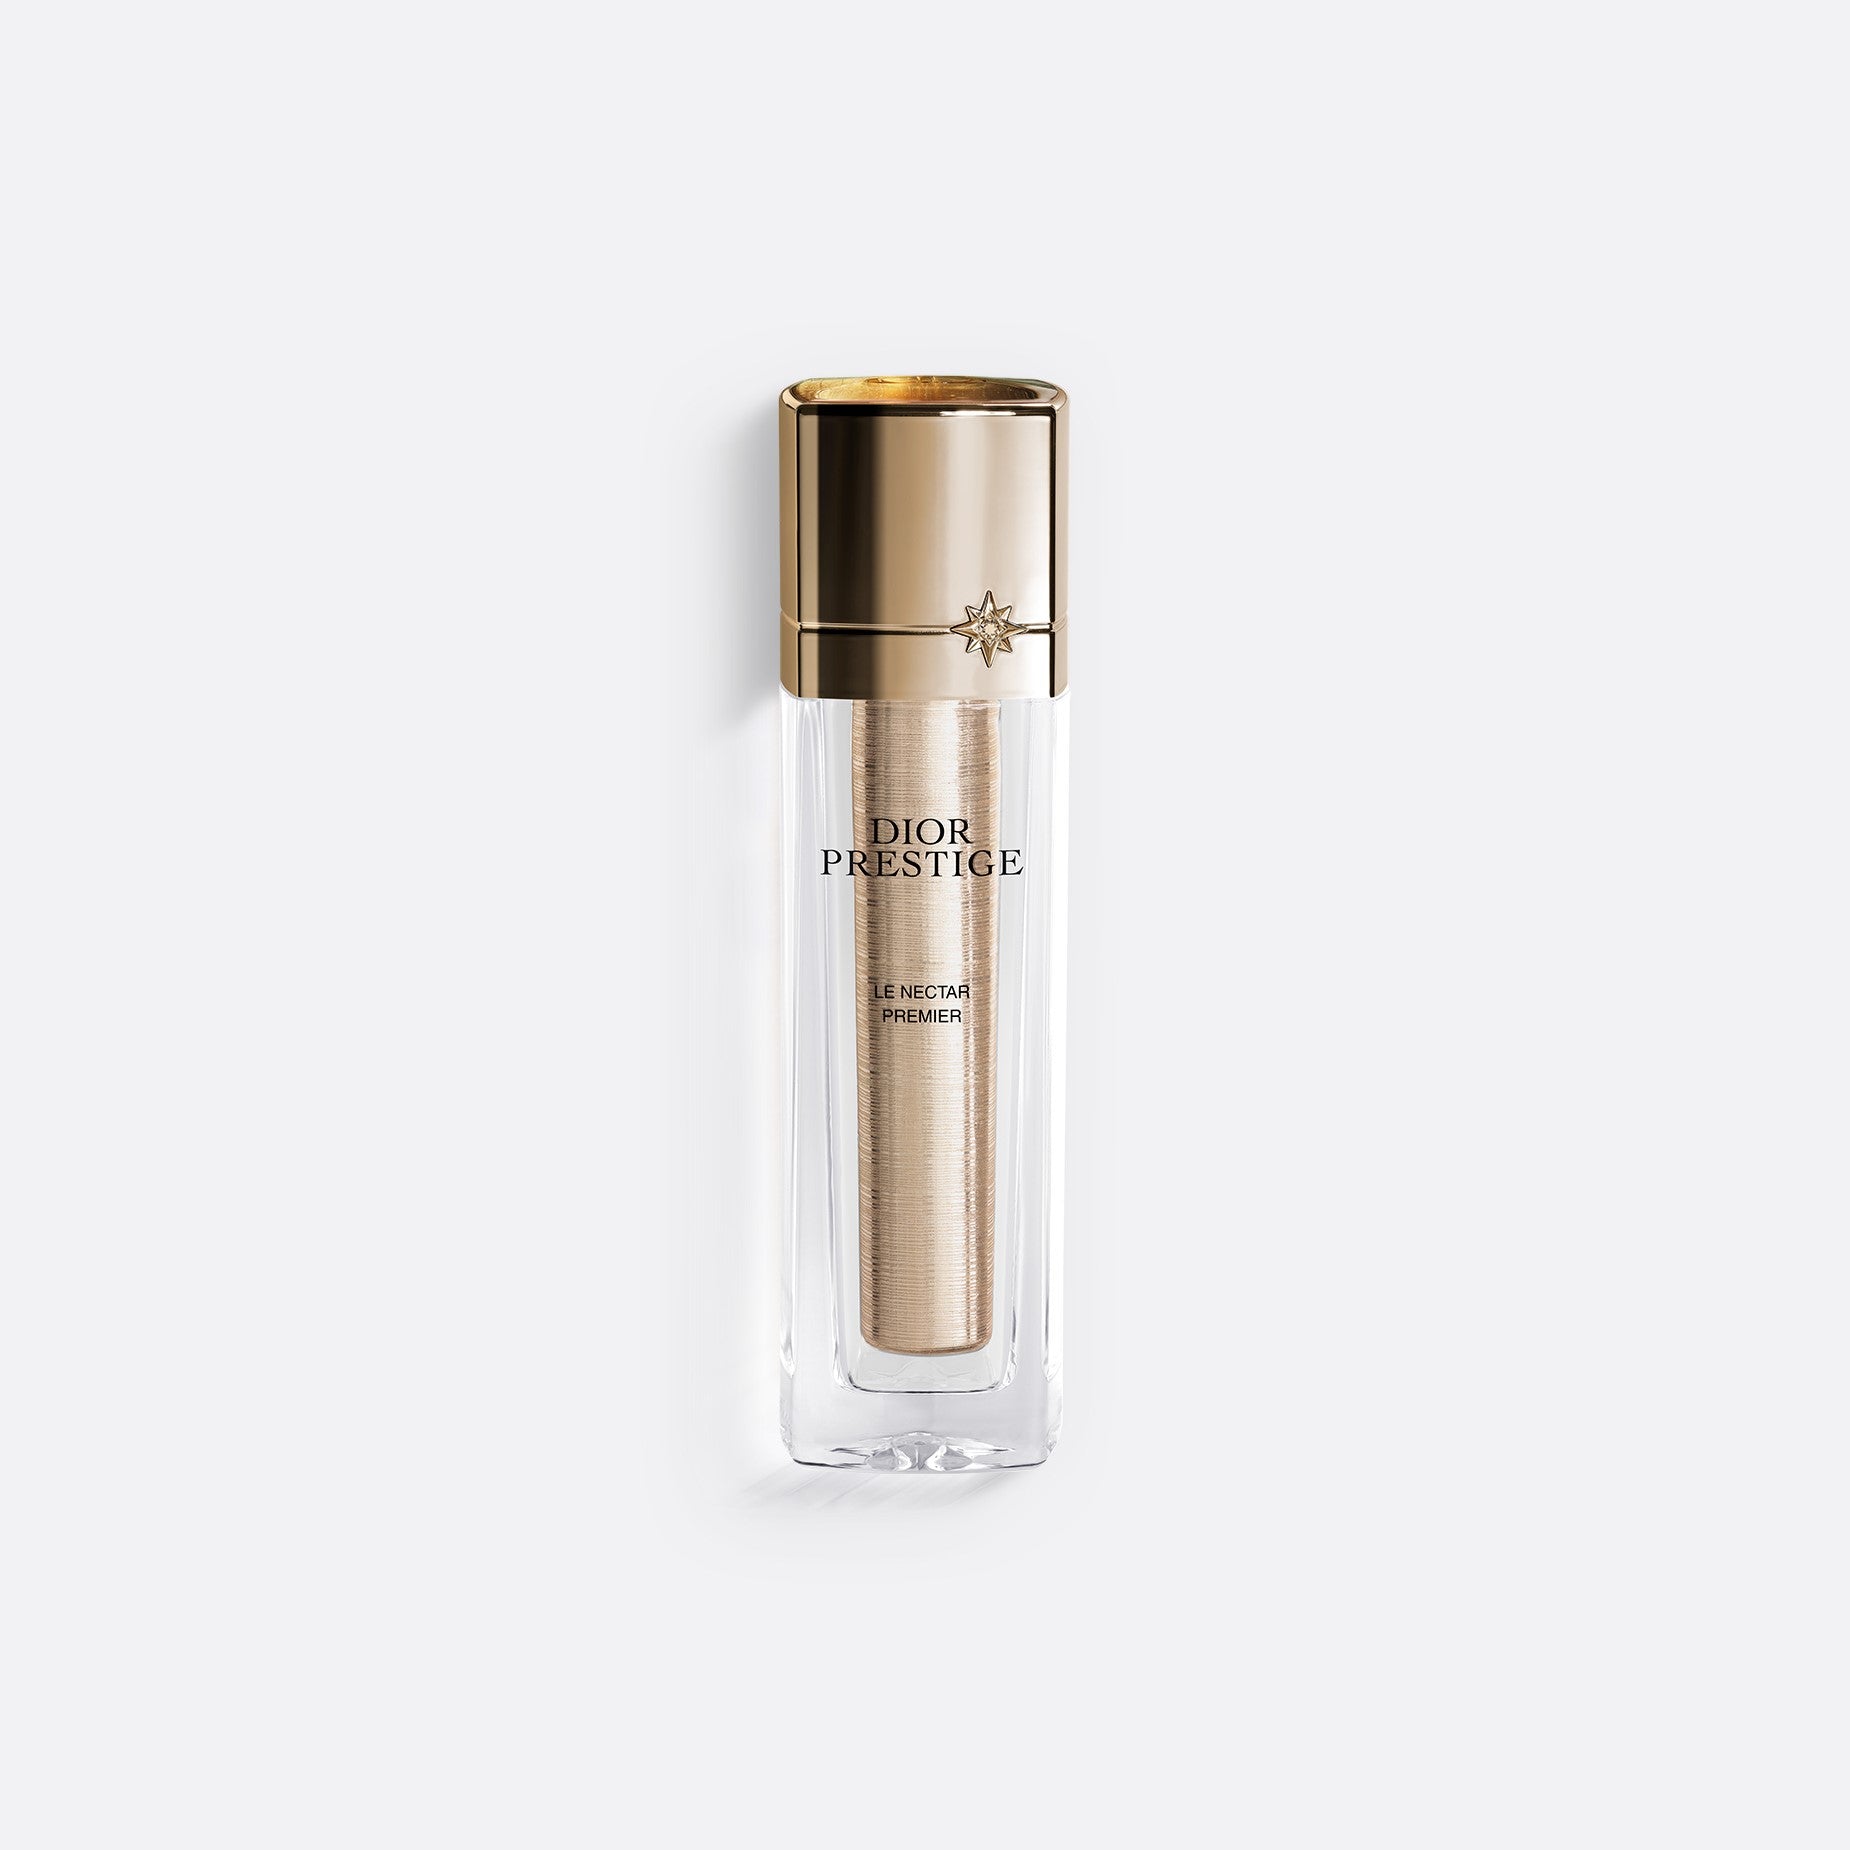 DIOR PRESTIGE LE NECTAR PREMIER | Intensive Revitalising Age-Defying Face and Neck Serum - Enhances, Densifies and Gives Radiance